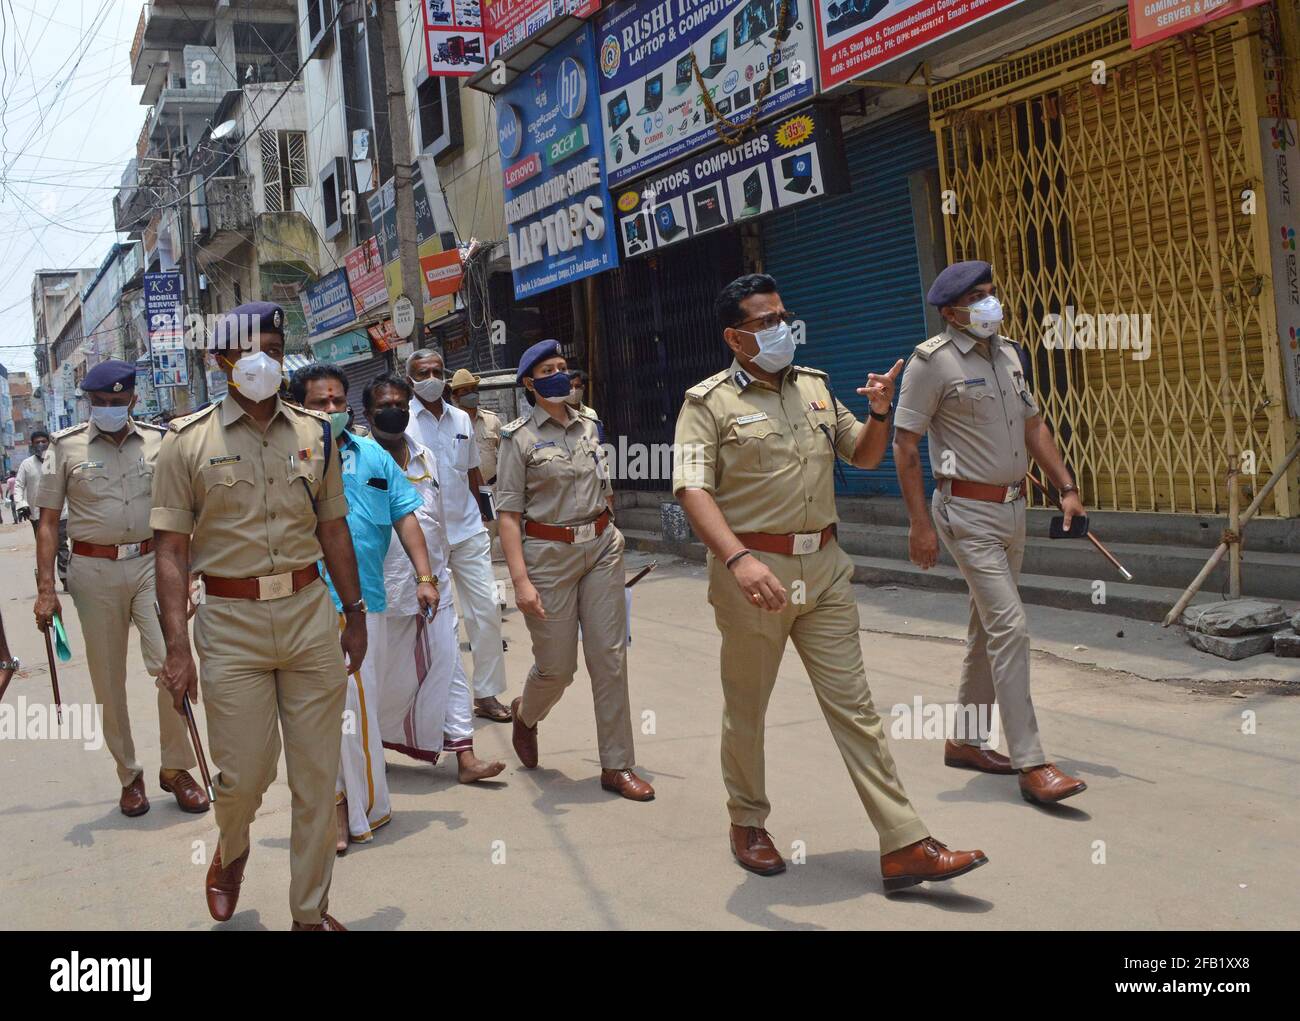 Bangalore, India. 23rd Apr, 2021. Police shut down commercial and non essential shops as new COVID-19 restrictions are imposed to curtail the rapidly spiraling chain of coronavirus infections, in Bangalore, India, April 23, 2021. Credit: Str/Xinhua/Alamy Live News Stock Photo